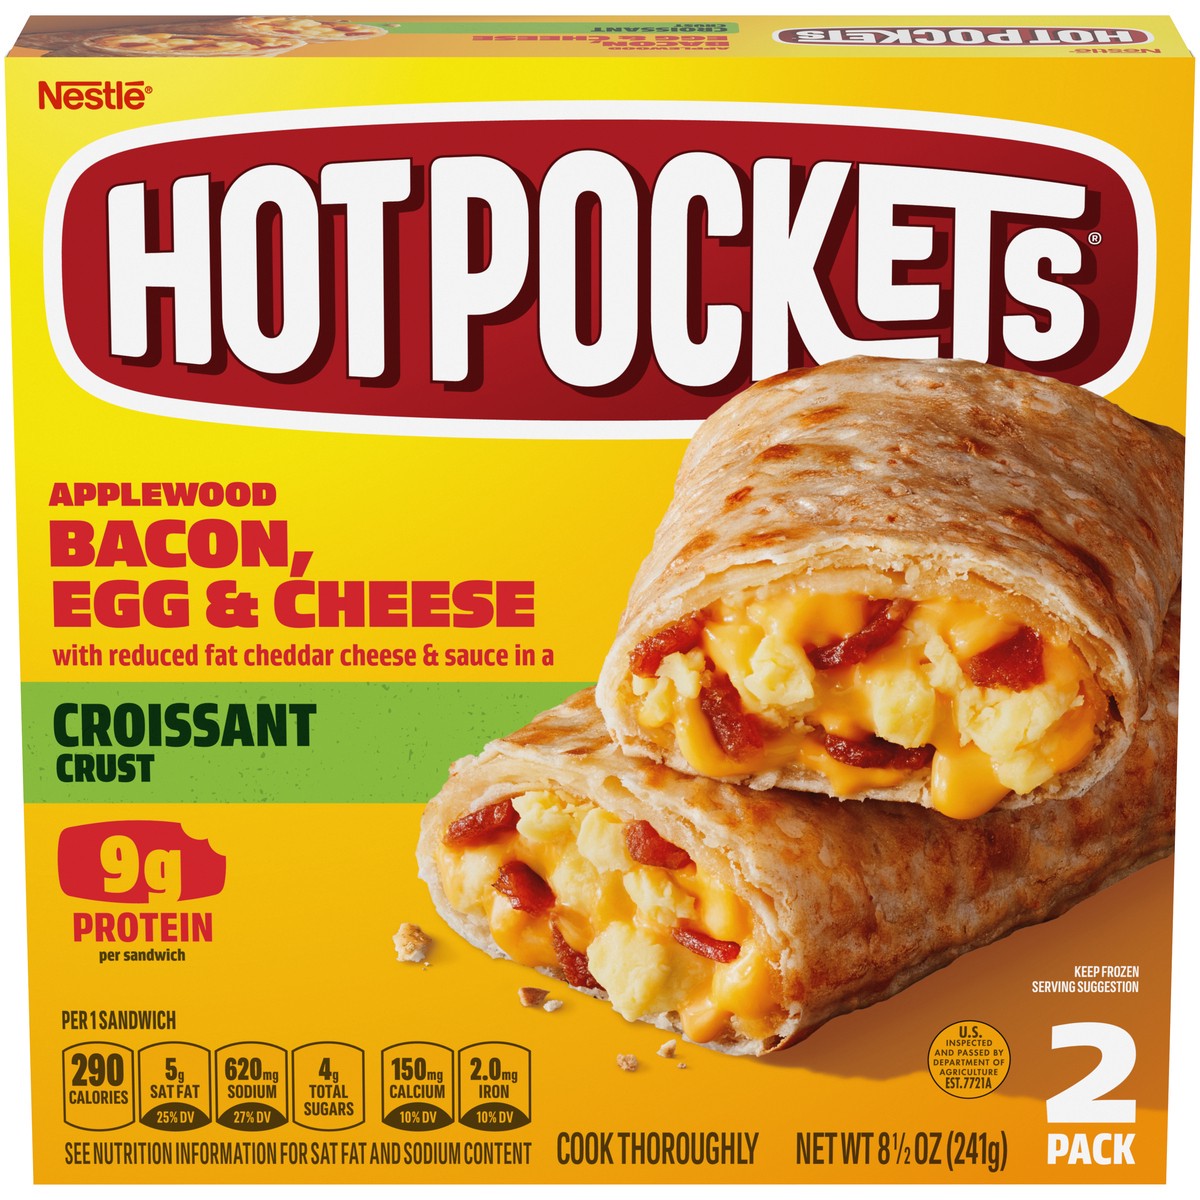 slide 1 of 9, Hot Pockets Applewood Bacon, Egg & Cheese Croissant Crust Frozen Breakfast Sandwiches, Breakfast Hot Pockets Made with Cheddar Cheese, 2 Count, 8.5 oz